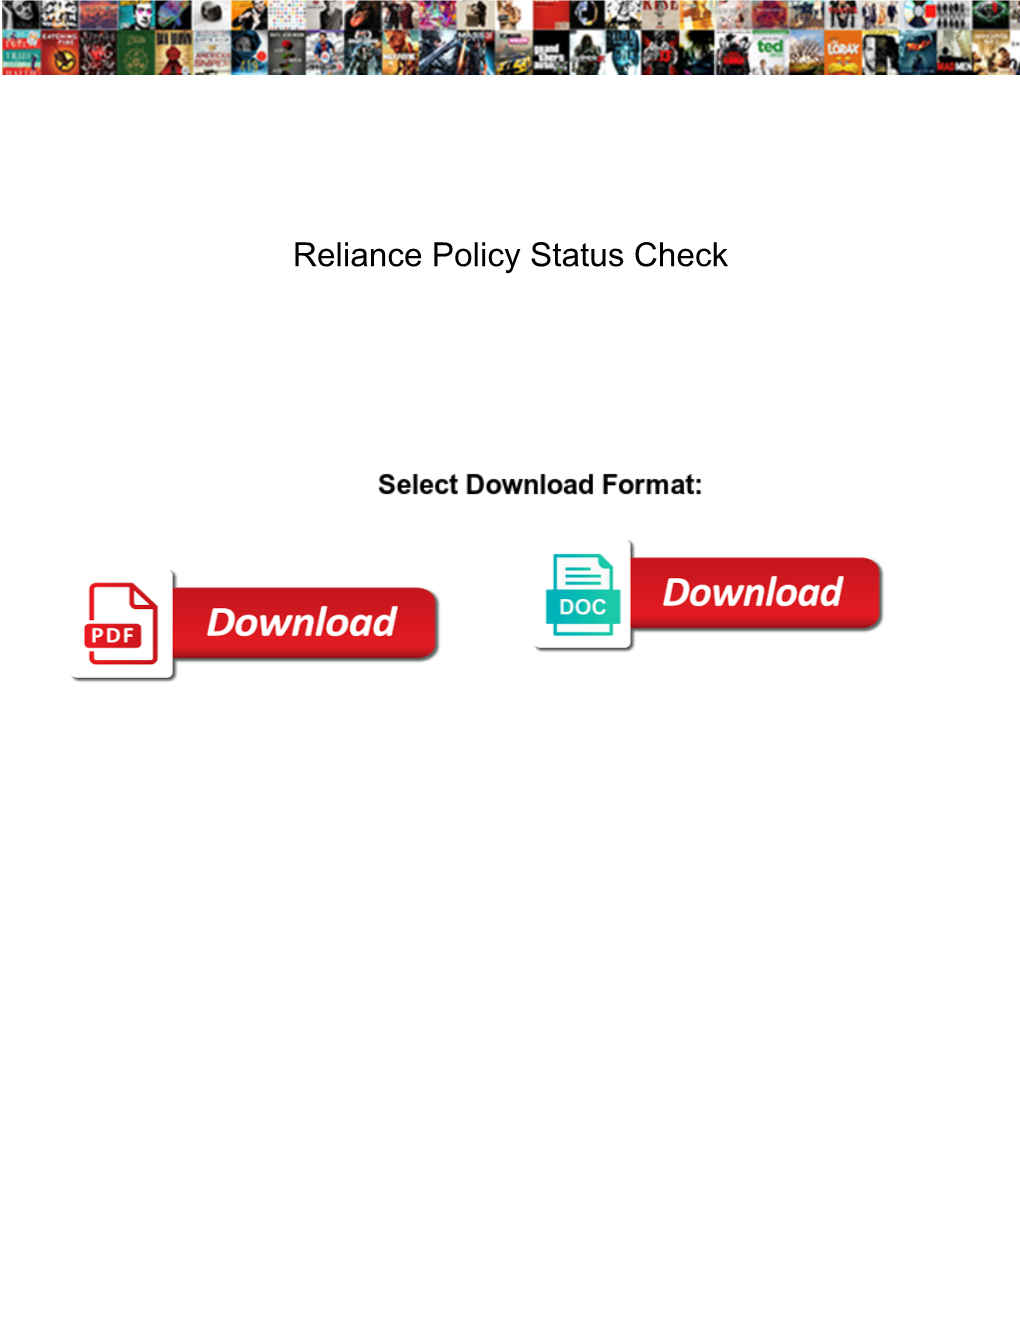 Reliance Policy Status Check